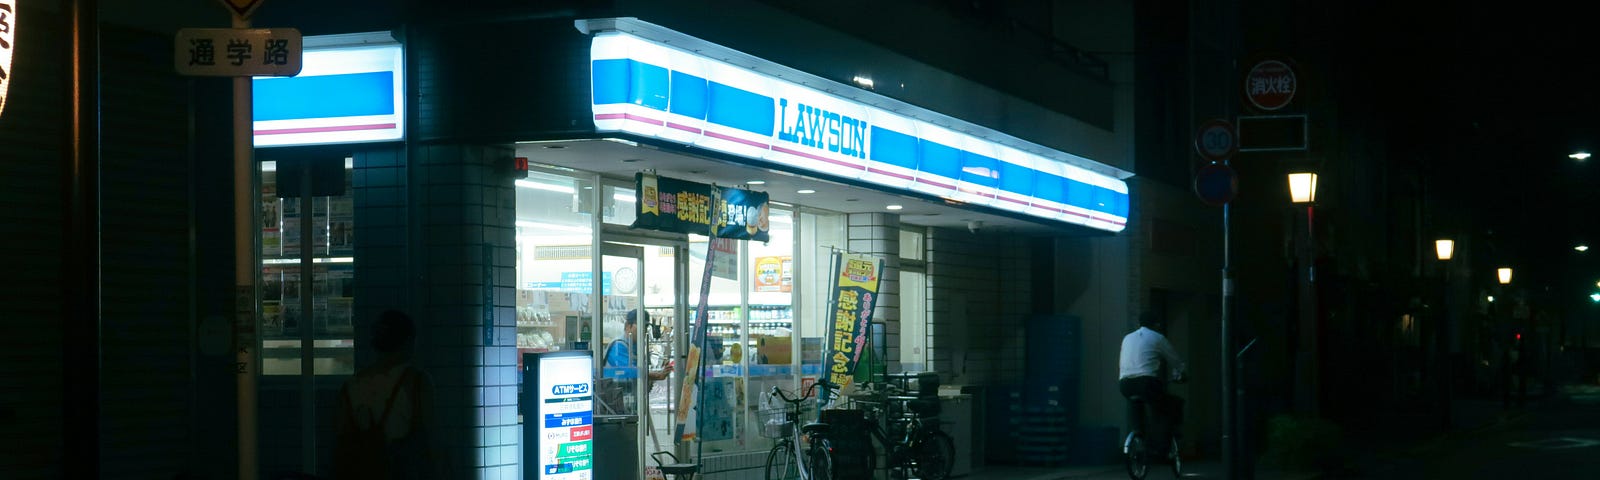 Lawson 24Hr convenient store in Japan at late night